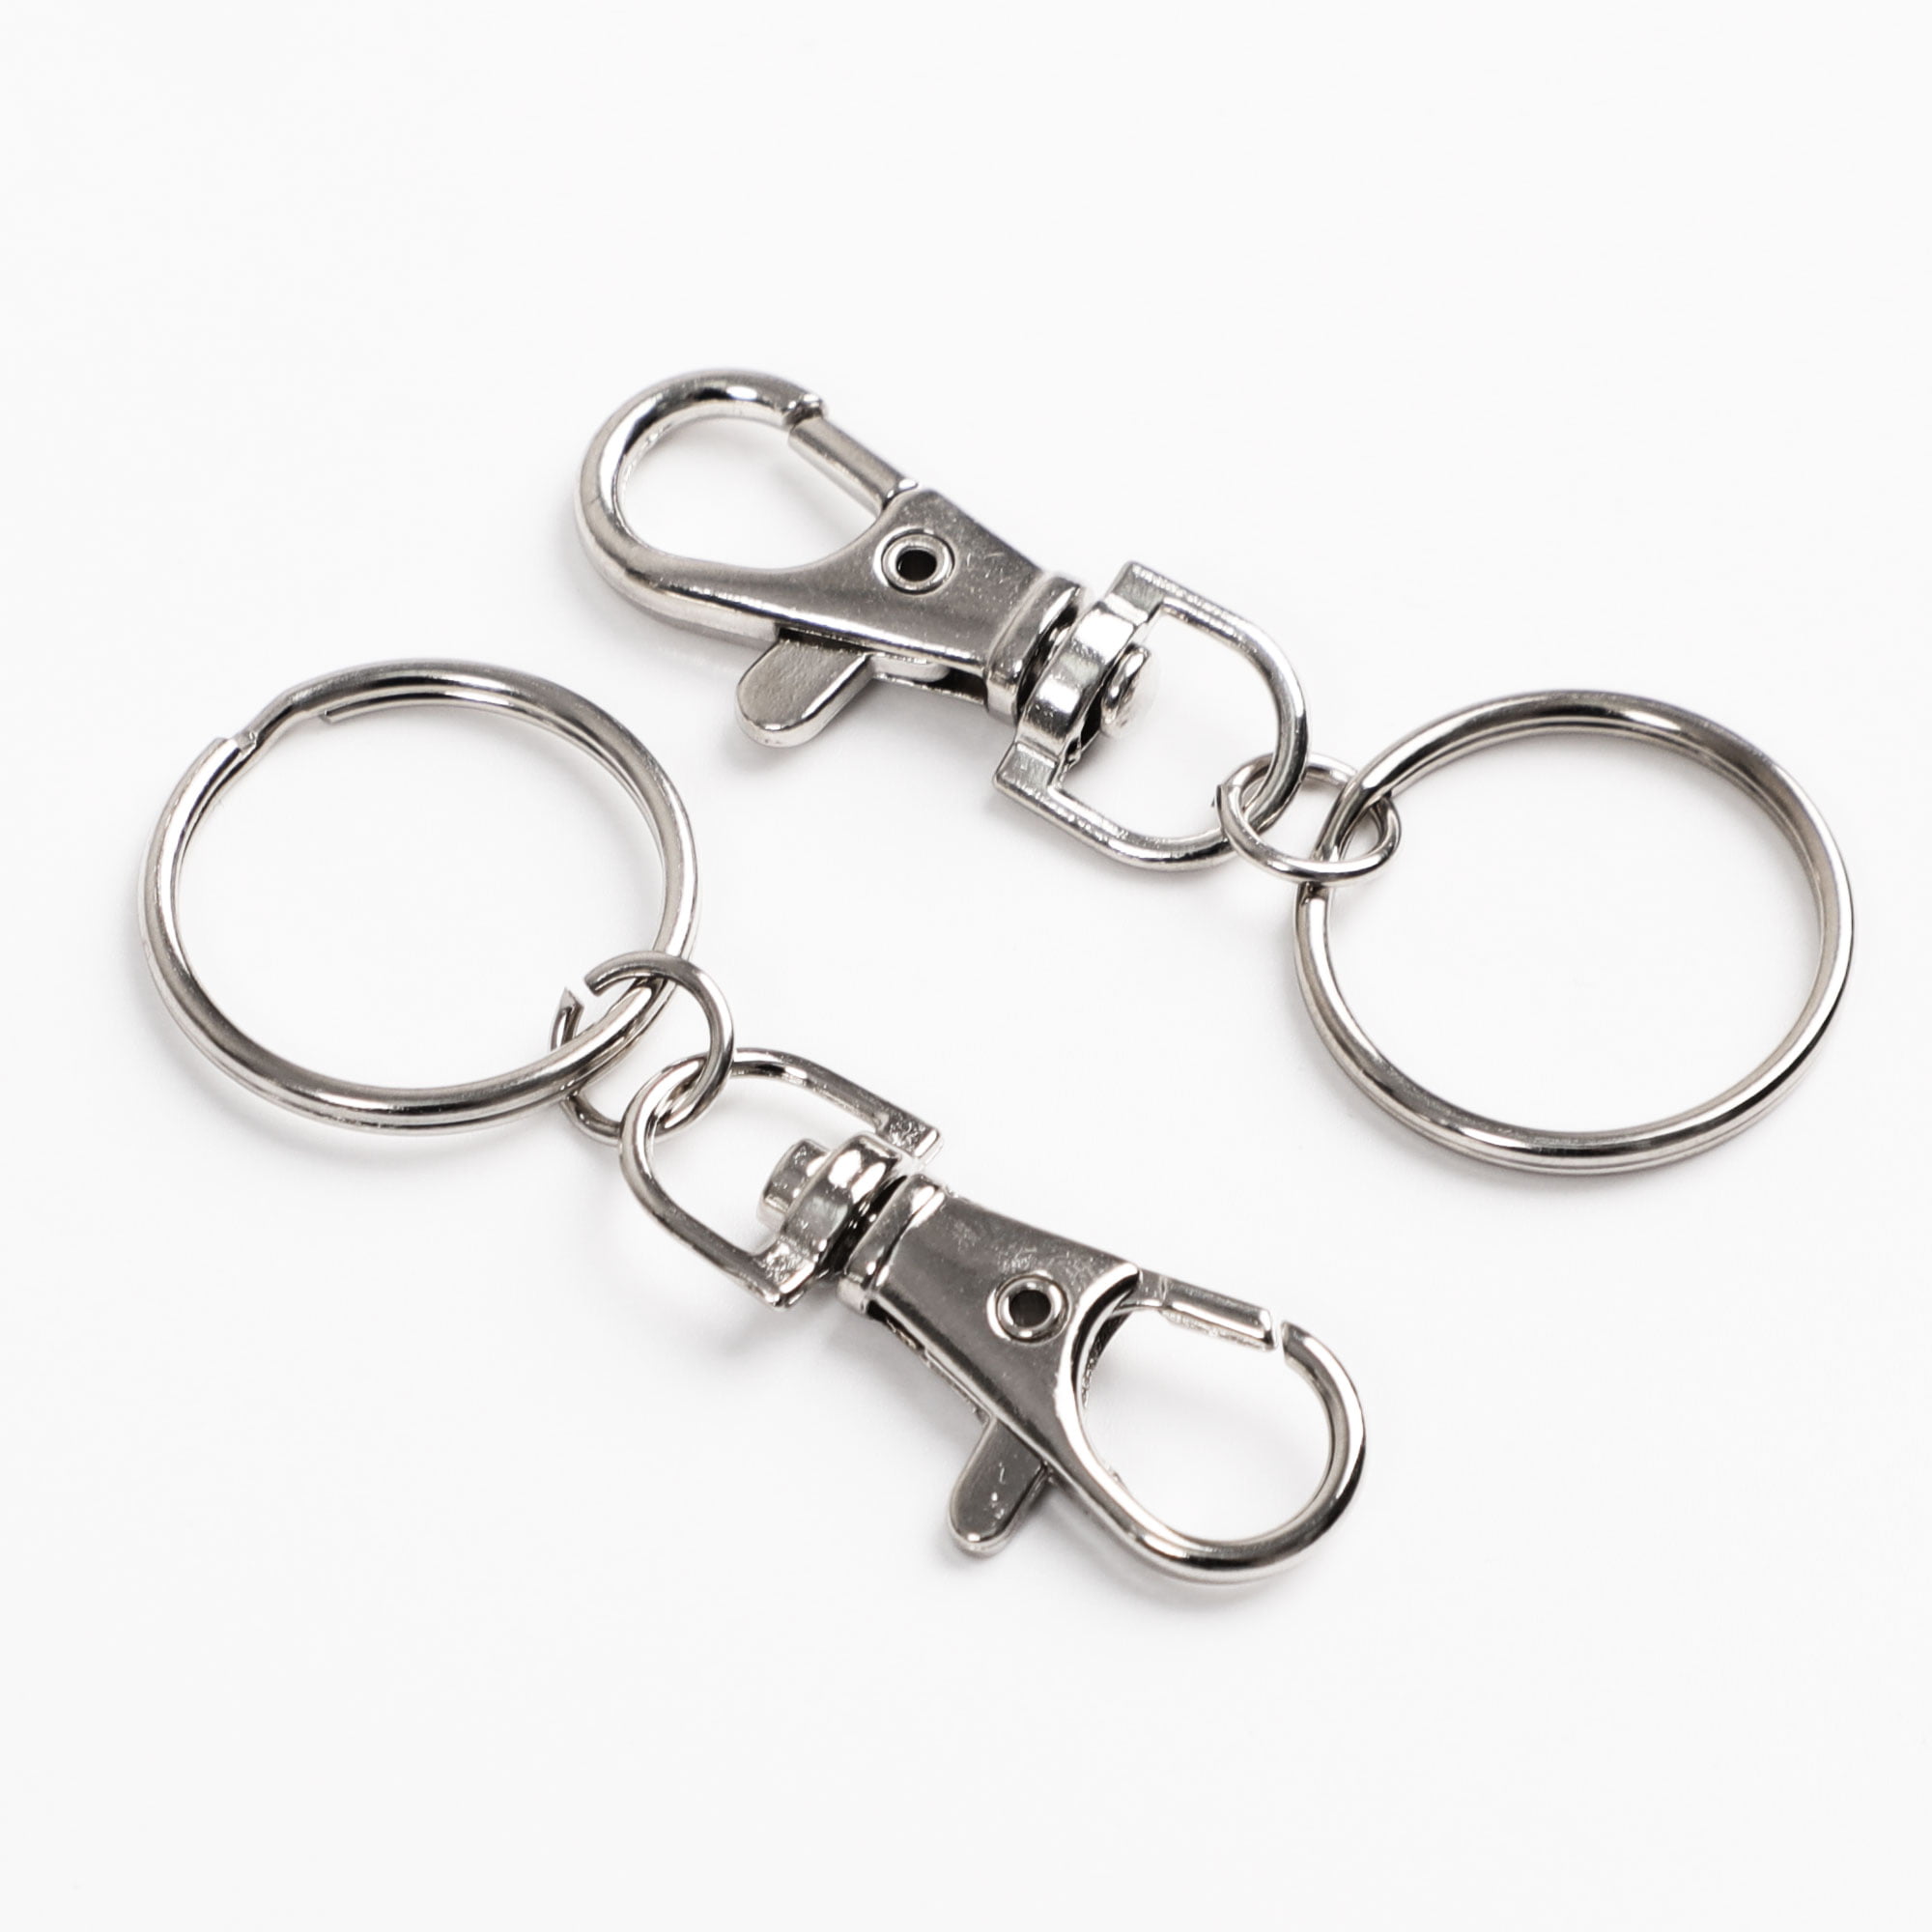  Hoement 20 Sets Dog Button Lobster Clasp Keychain Key